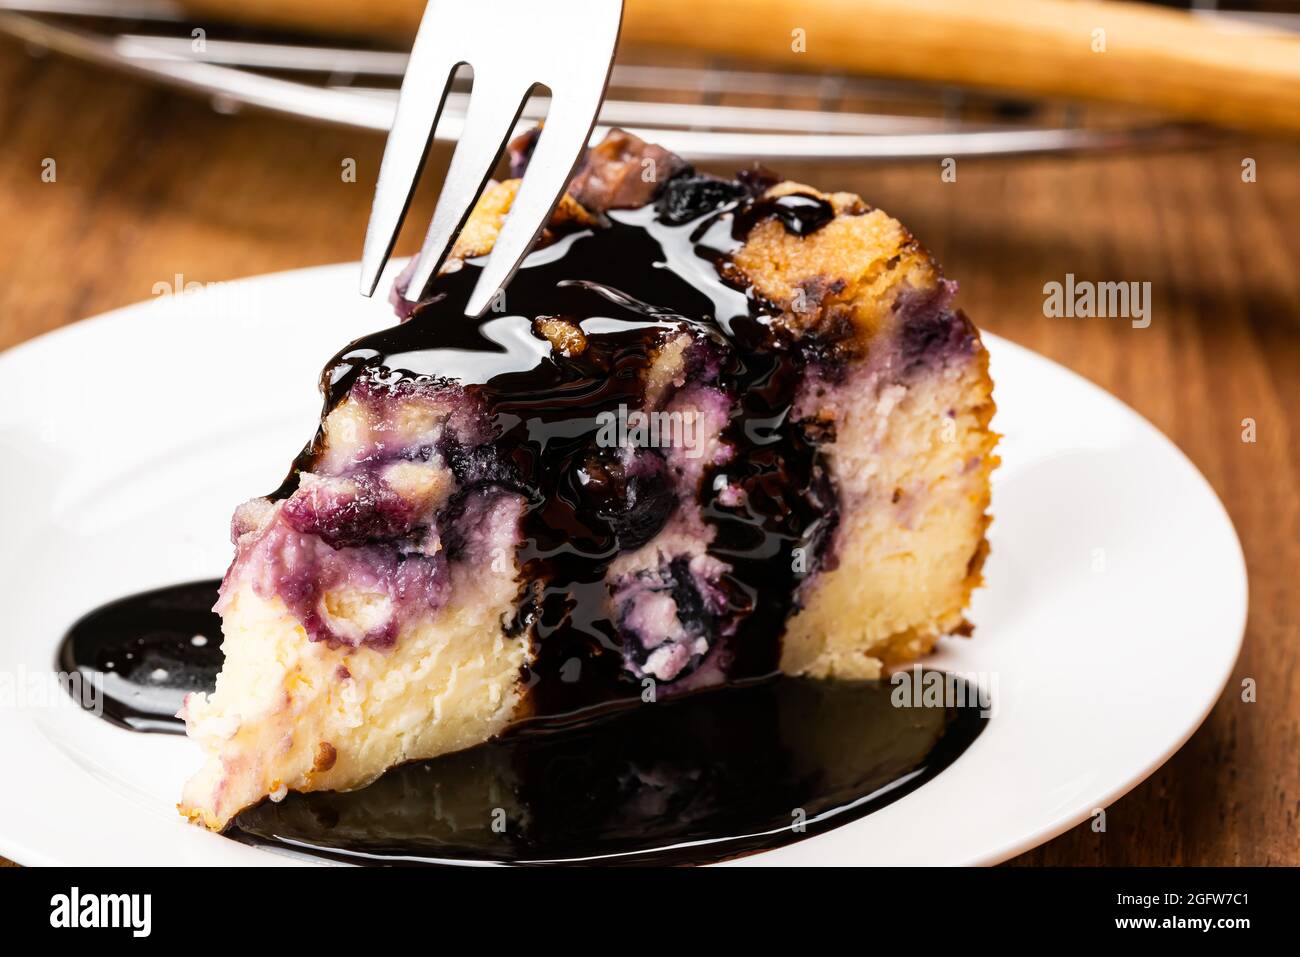 Using metal fork taking a bite from a piece of homemade blueberry and crumble cheesecake topping with chocolate in white ceramic plate on wooden table Stock Photo